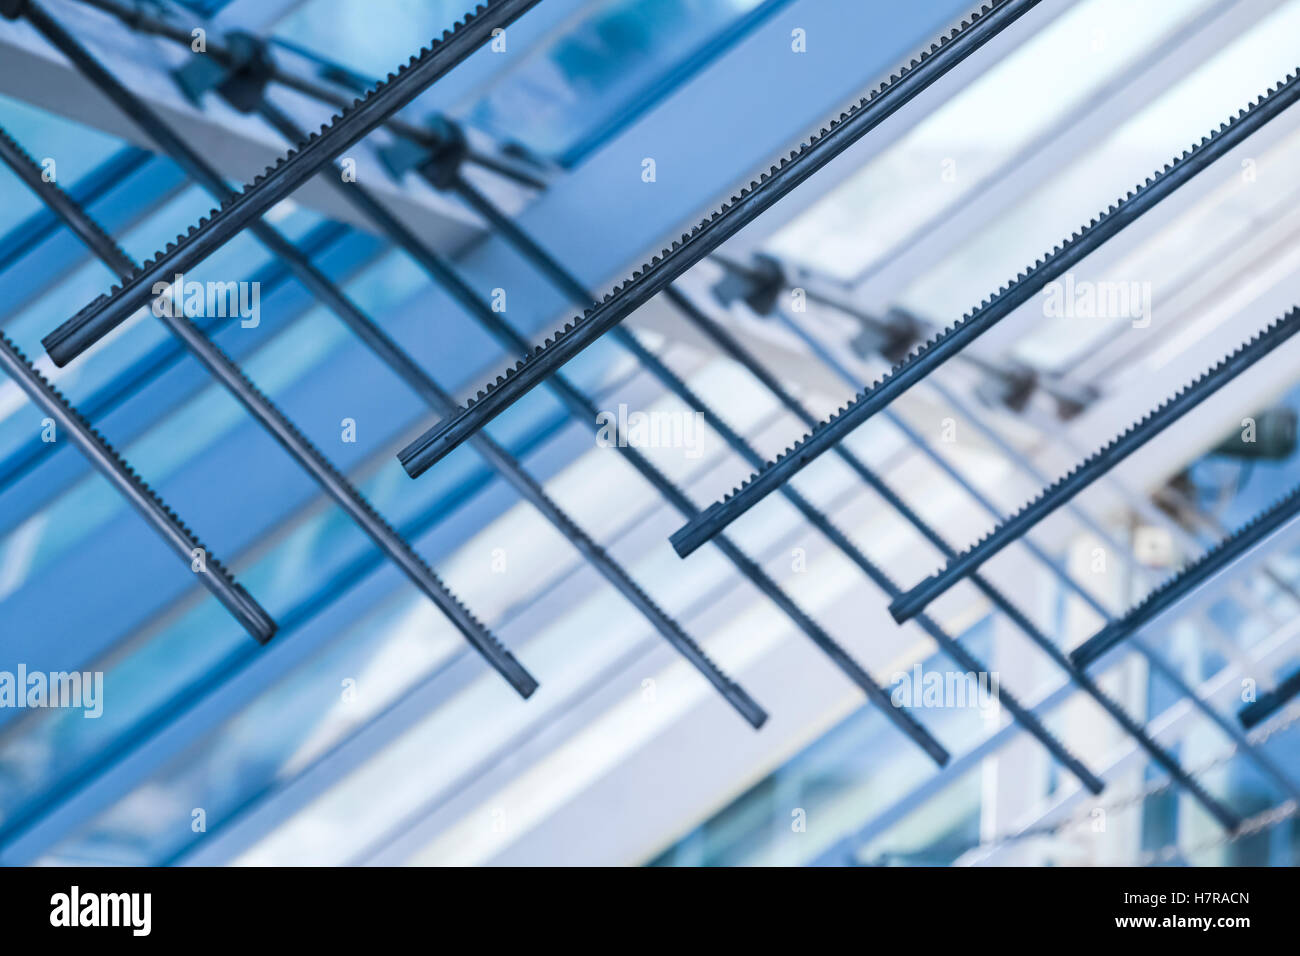 Opening drive racks. Abstract high-tech architecture background, internal details of glass roof with lockable windows sections, Stock Photo